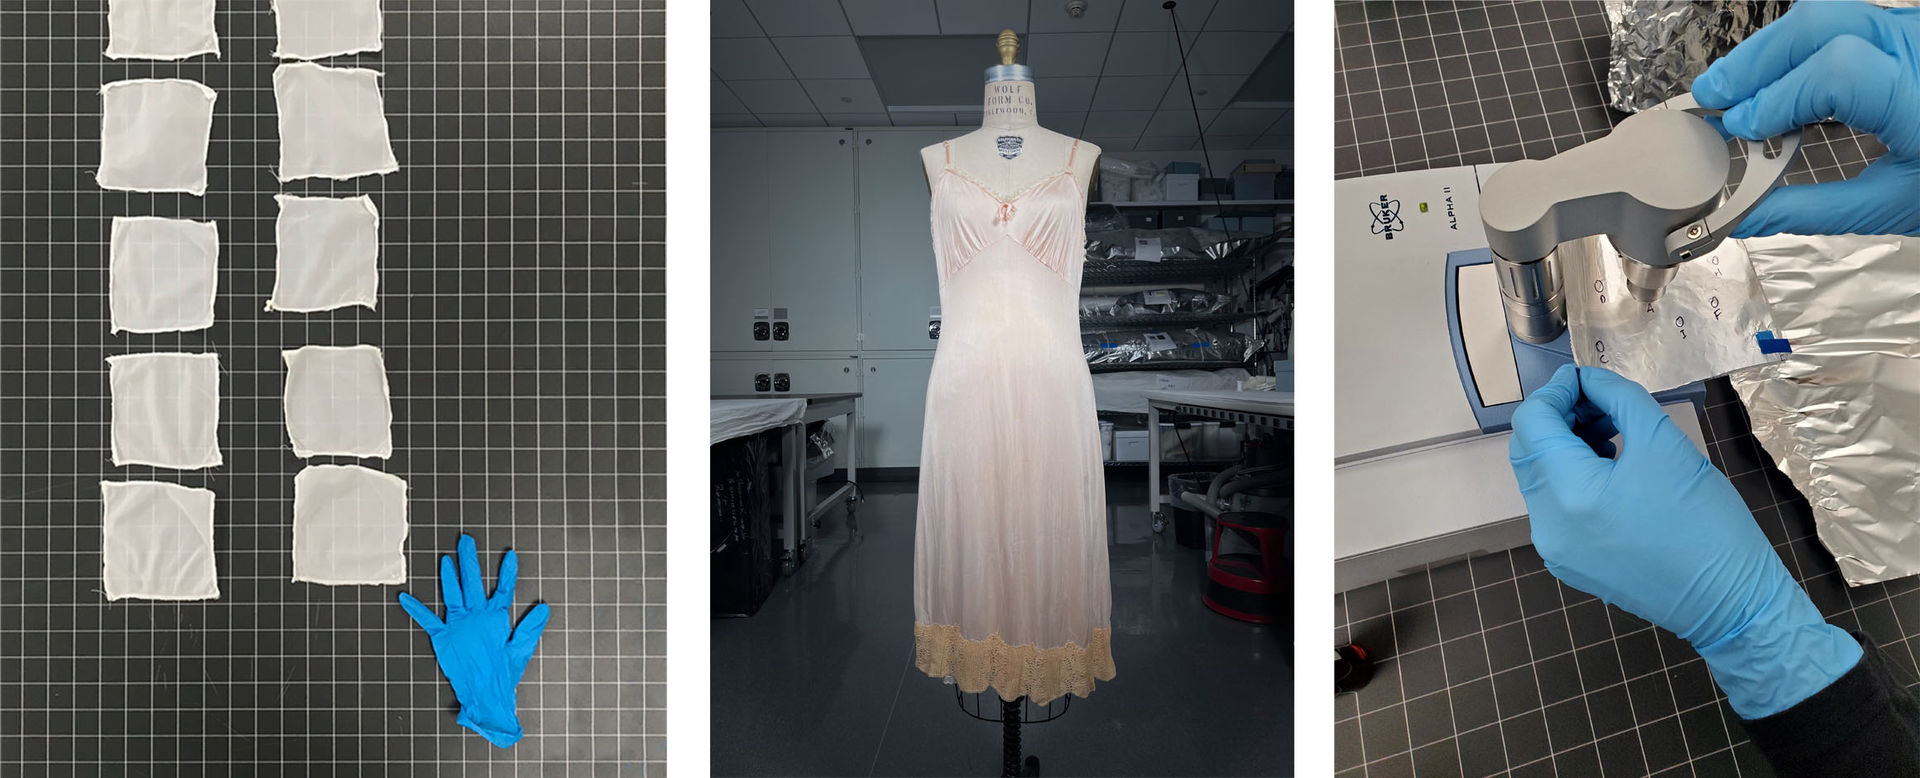 Three images in a horizontal row. Left image shows ten white fabric samples in two columns on a black table with white checkered lines and one blue glove in the bottom right of the image. Center image shows a light pink slip with a yellow lace hem and thin straps on a dress form. The right image is a close-up of two hands in blue gloves handling a square of aluminum foil with letters denoting sampling locations layered over a piece of white nylon fabric as it is being analyzed with a grey, shoe-box-sized spectrometer.